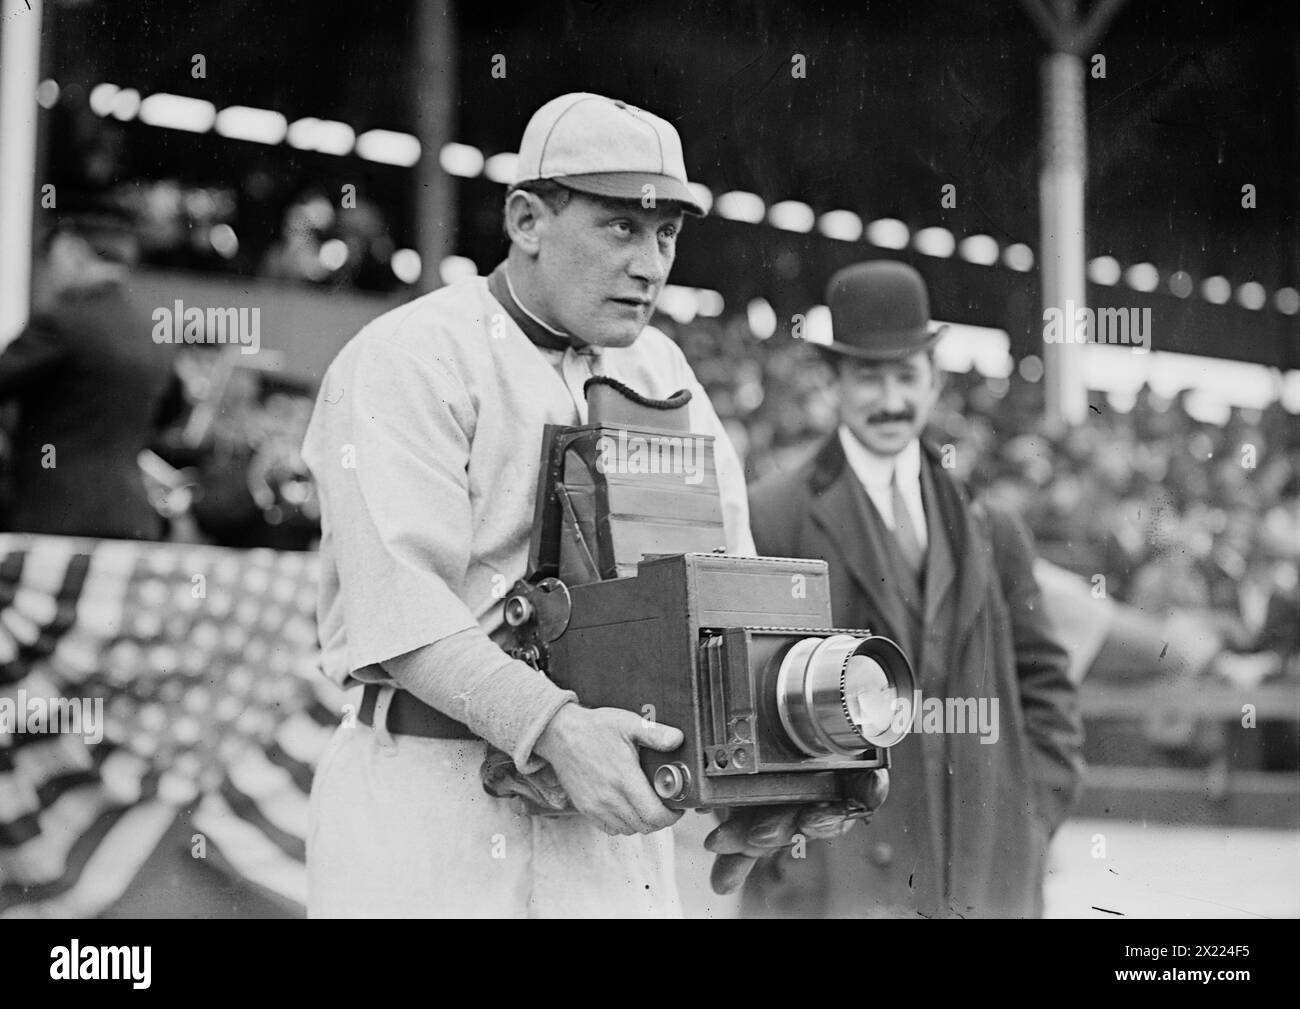 Germany Schaefer, Washington AL (baseball), 1911. Shows Herman A. &quot;Germany&quot;Schaefer (1876-1919), one of the most entertaining characters in baseball history, trying out the other side of the camera during the Washington Senators visit to play the New York Highlanders in April, 1911. Germany Schaefer, a versatile infielder and quick baserunner, played most of his career with the Detroit Tigers and the Washington Senators. The camera is a 5x7 Press Graflex with a modification to accommodate the large lens. The camera was produced by the Folmer &amp; Schwing Division of Eastman Kodak Co Stock Photo